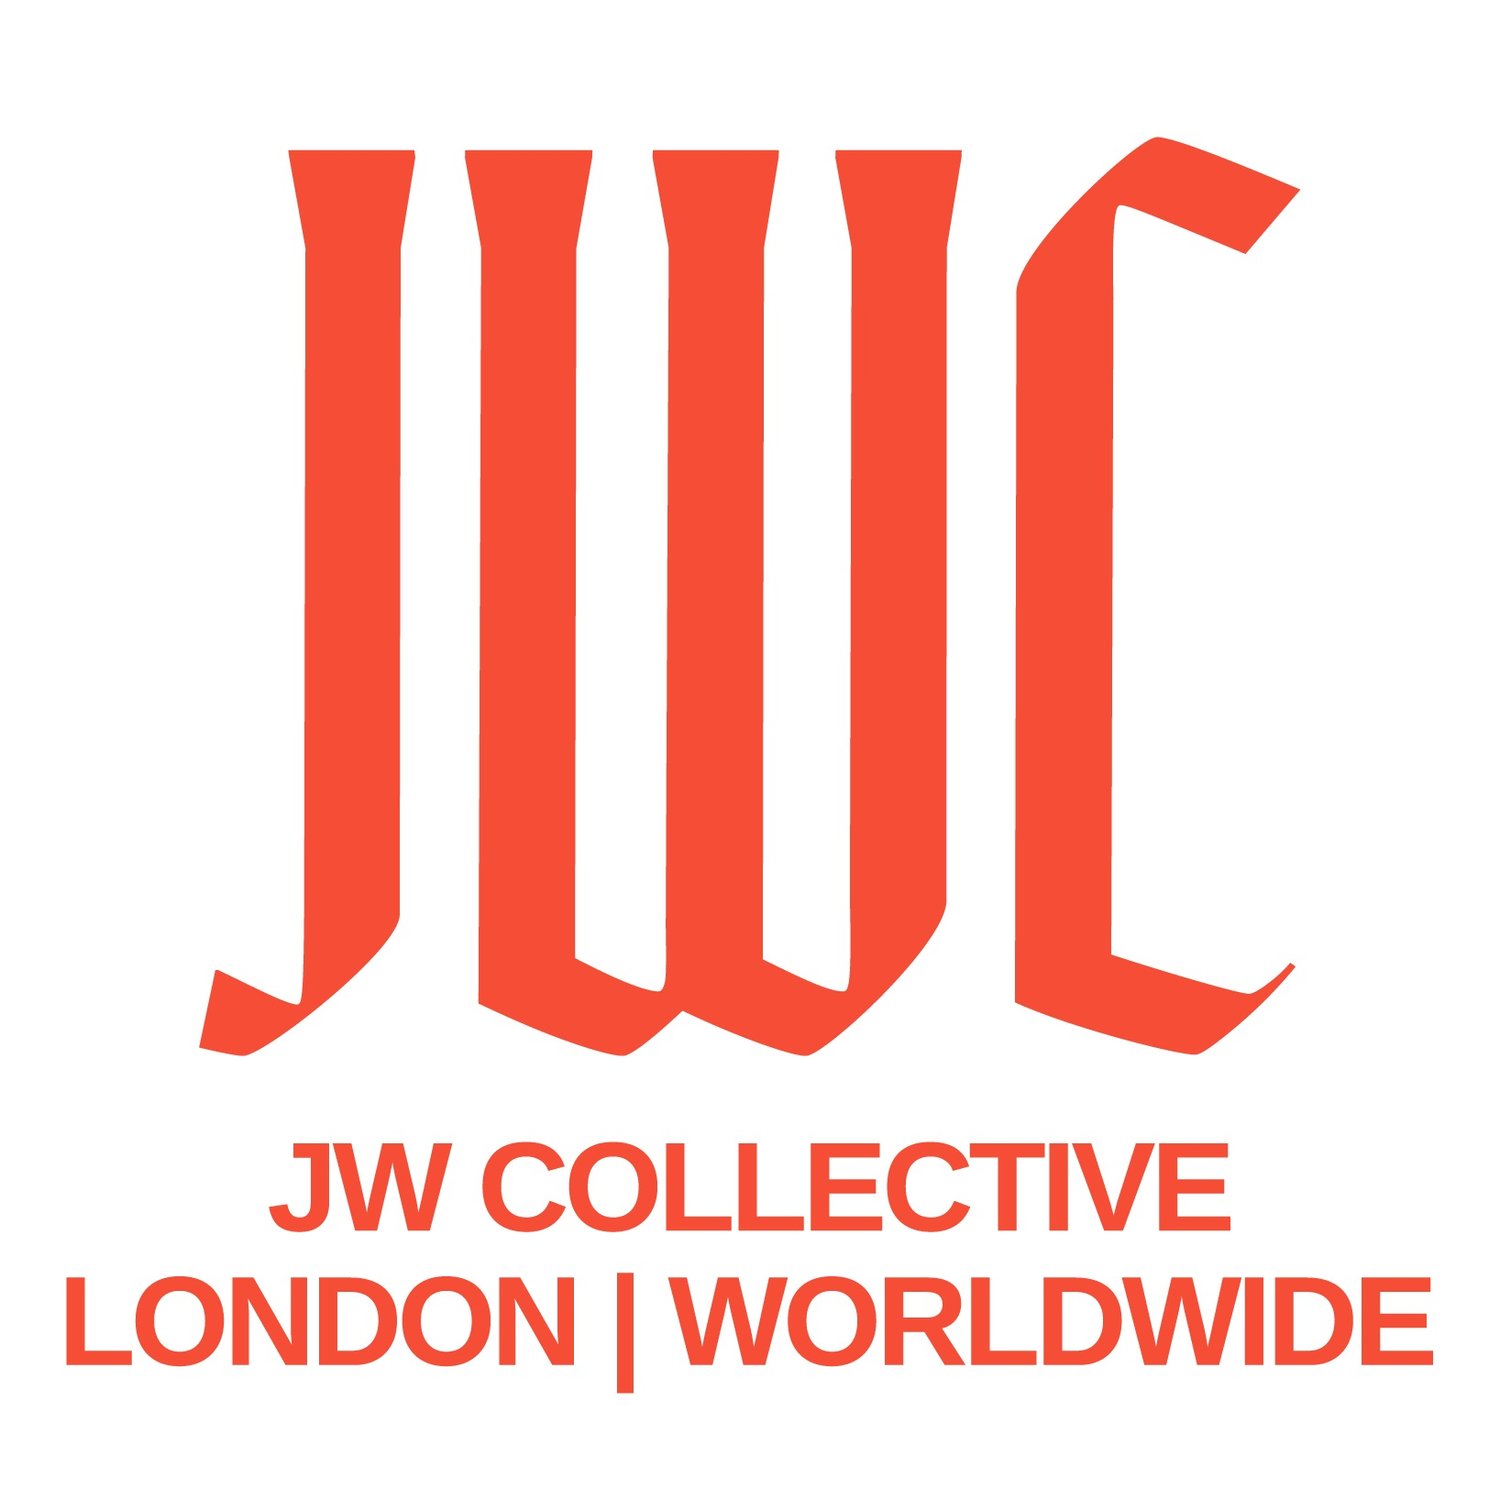 JW COLLECTIVE